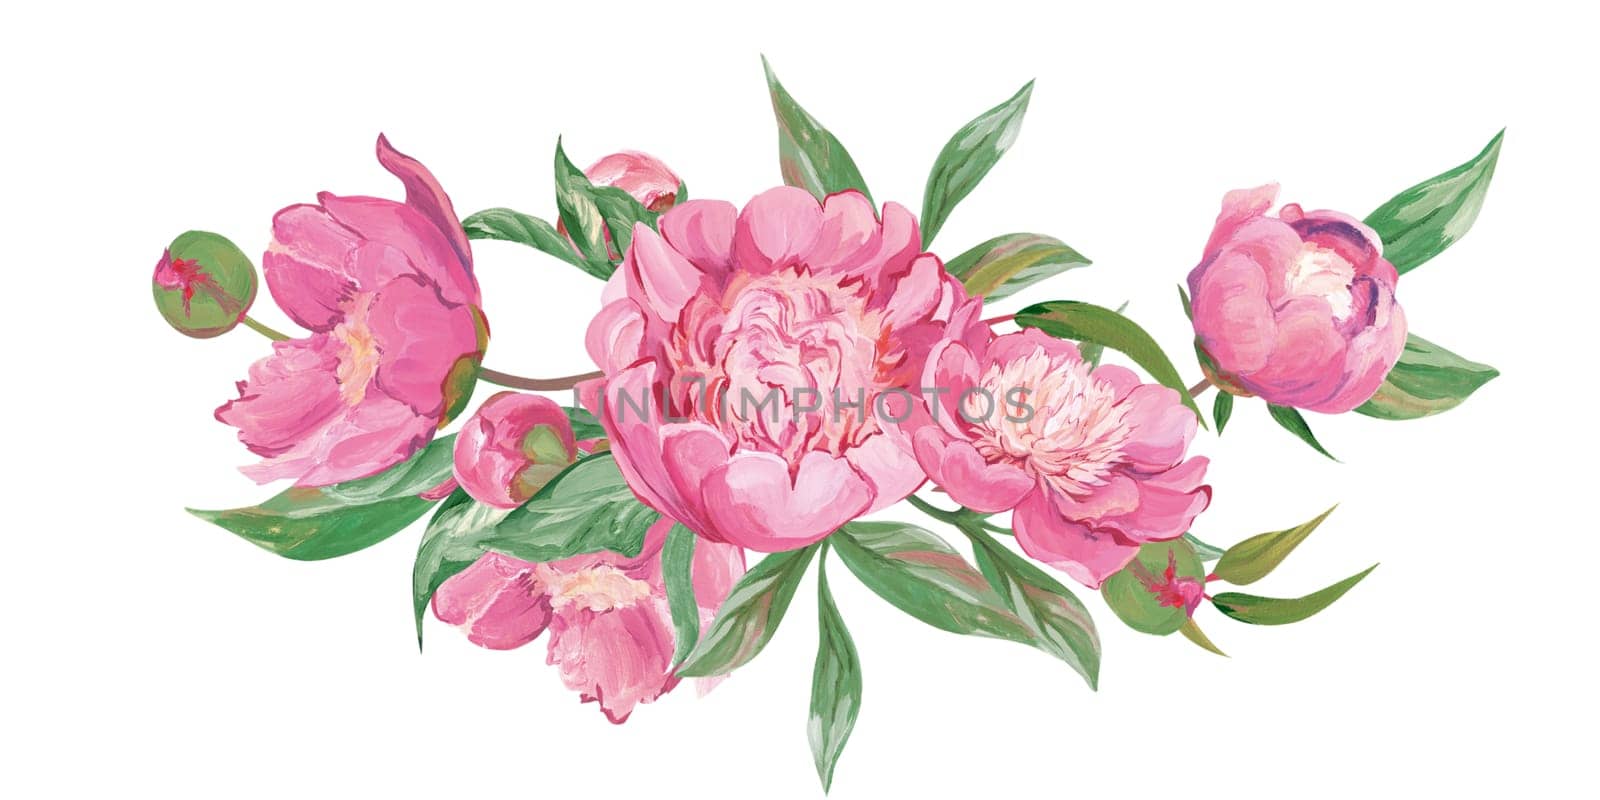 Bouquet of pink peonies and botanical elements isolated on white background